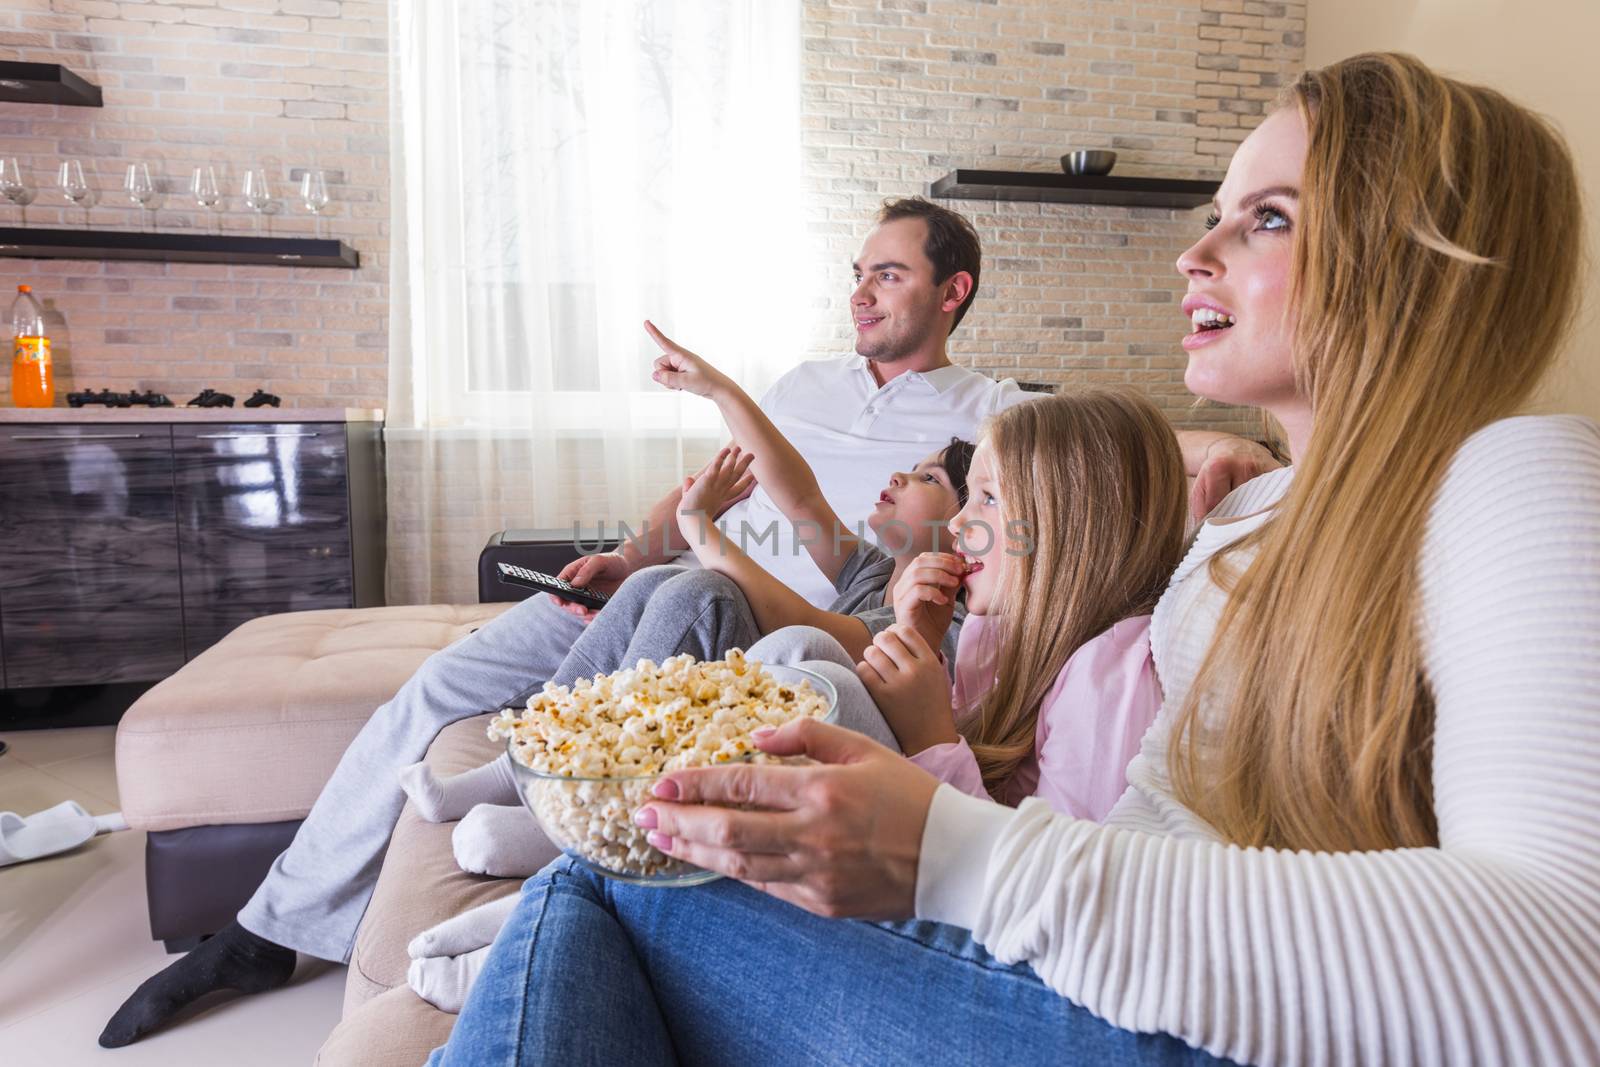 Beautiful young parents and their children are watching TV, eating popcorn and smiling while sitting on couch at home